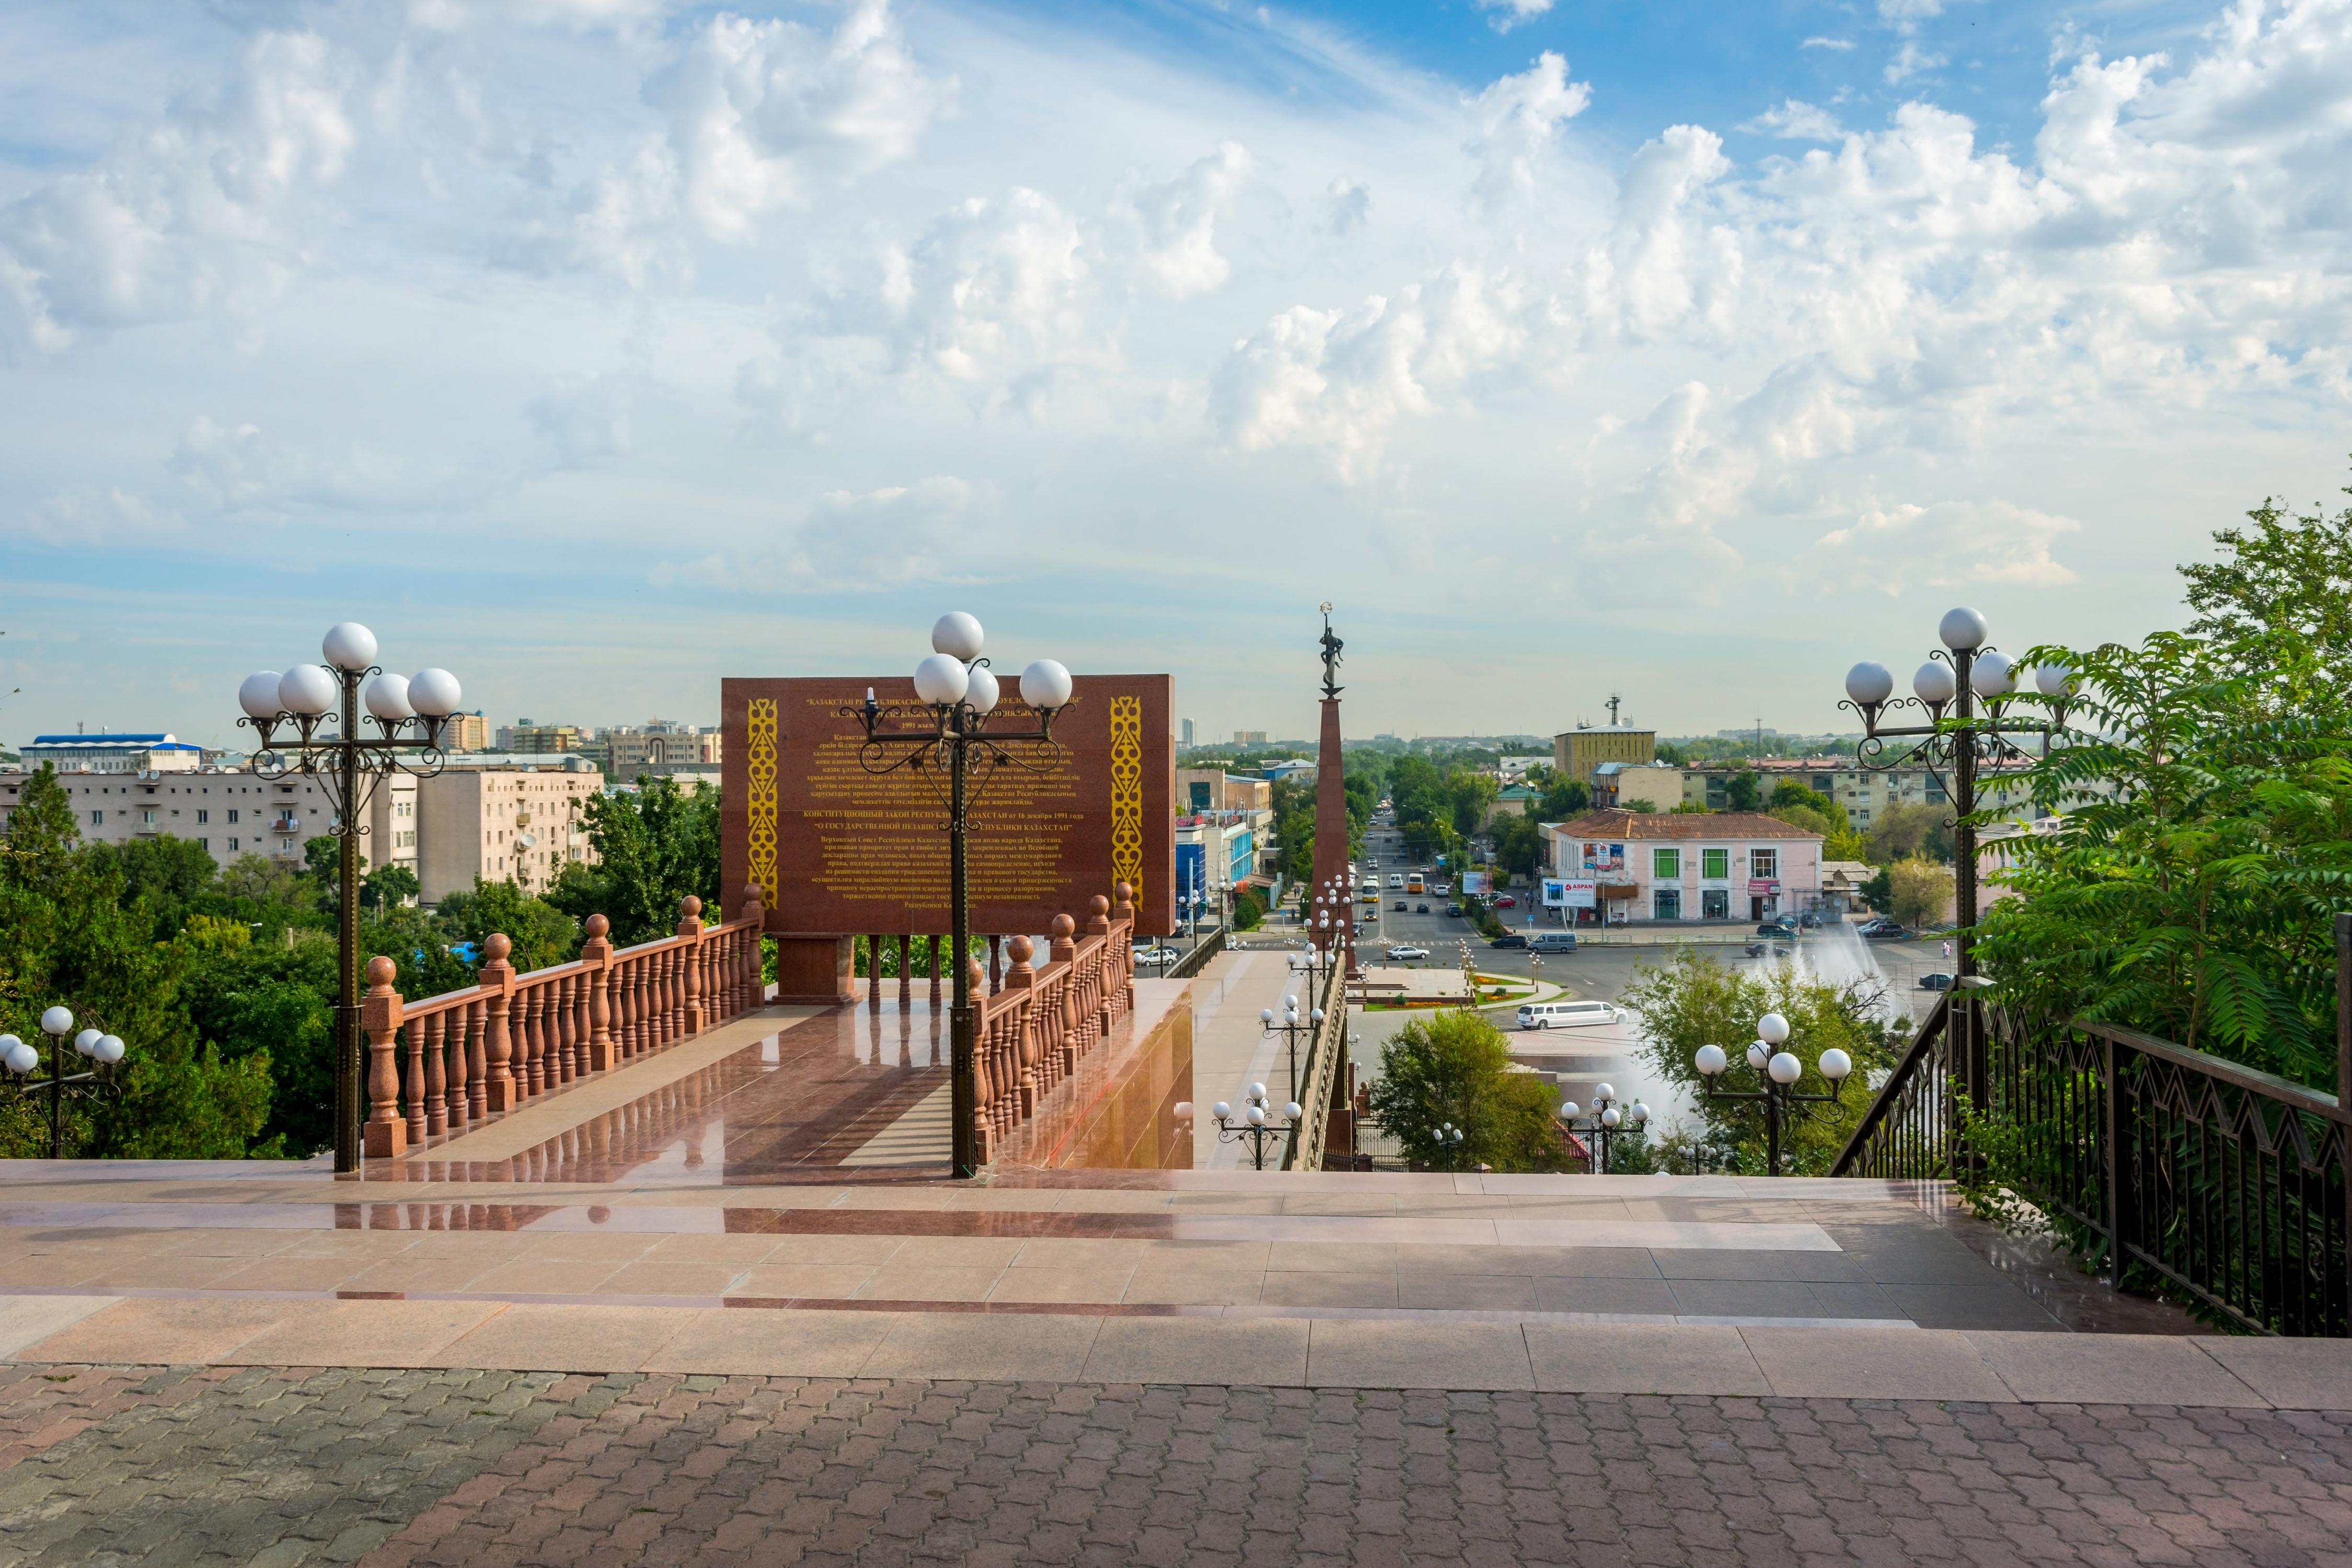 A view of beautiful Shymkent, the gateway town to this site © Ana Flasker / Shutterstock